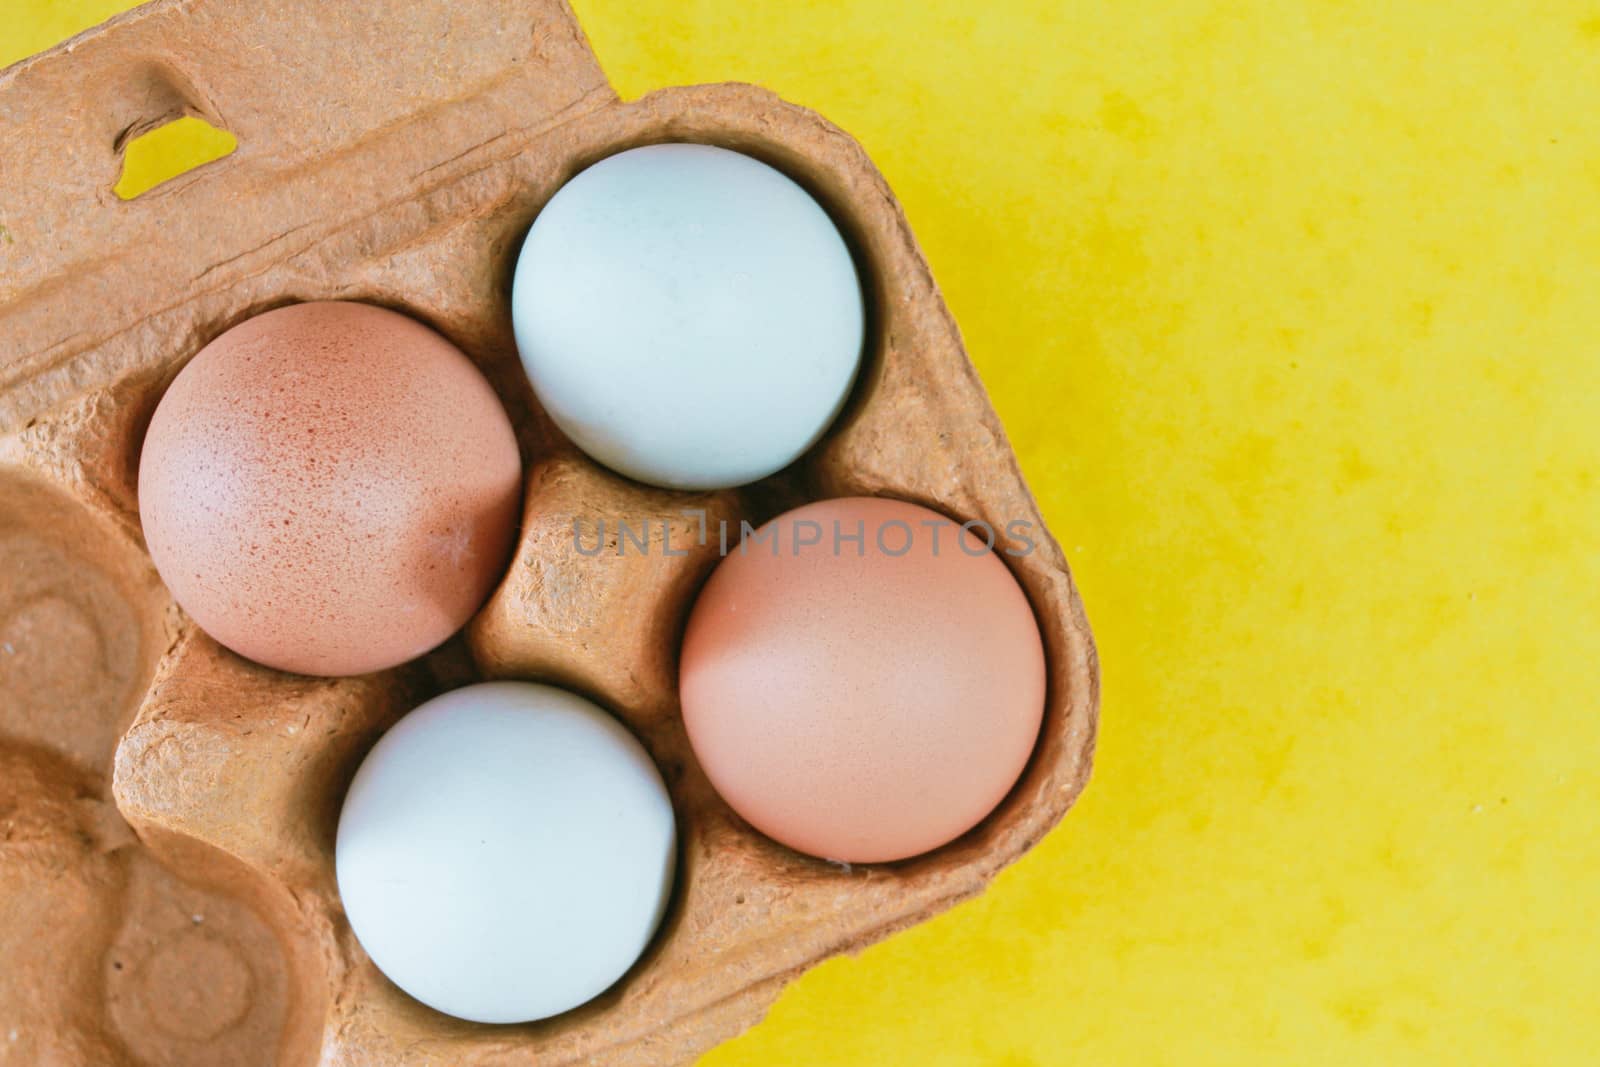 Box of eggs on a yellow background